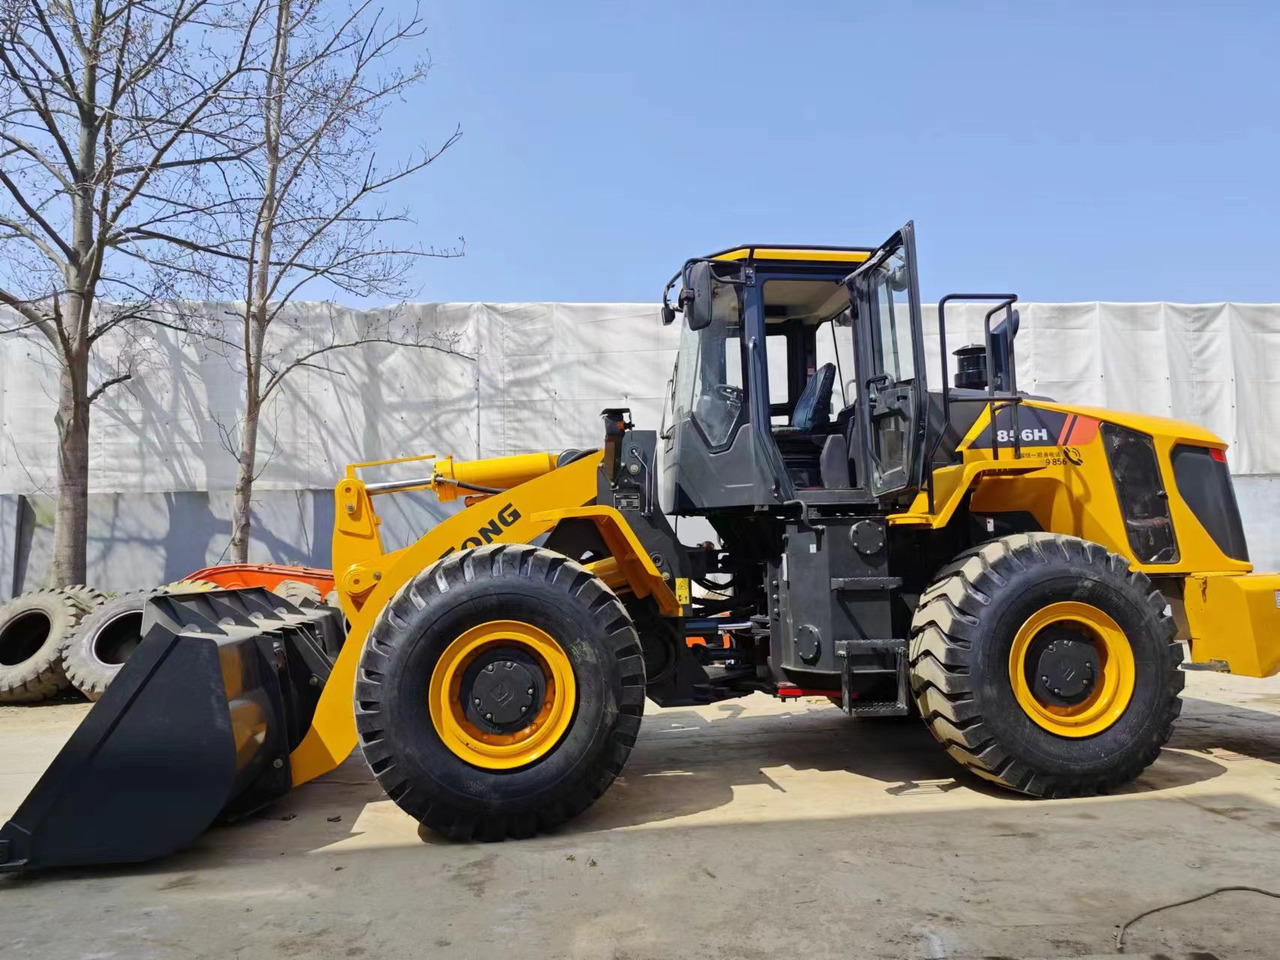 Chargeuse sur pneus LIUGONG 856H 856 used wheel loader: photos 5